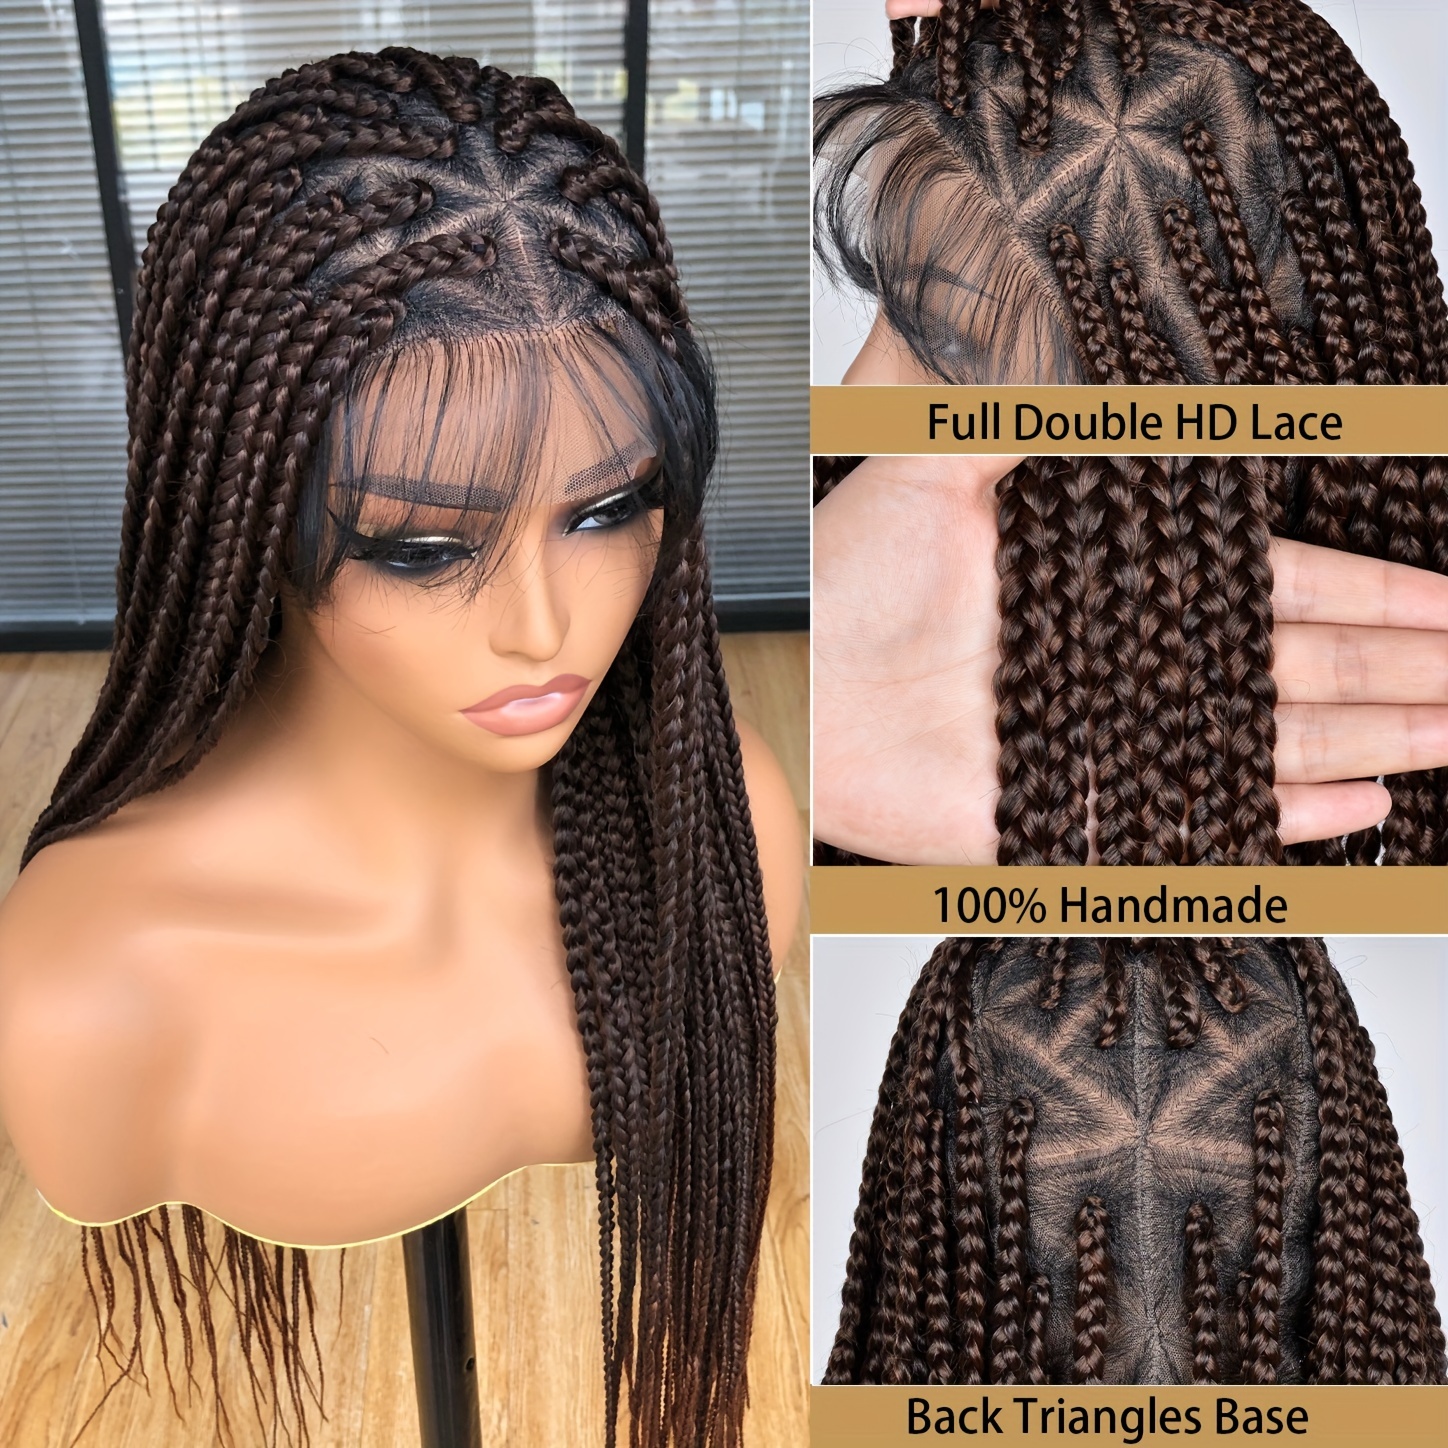 Ombre Red Box Braid Wig – Shop Sassy Chick